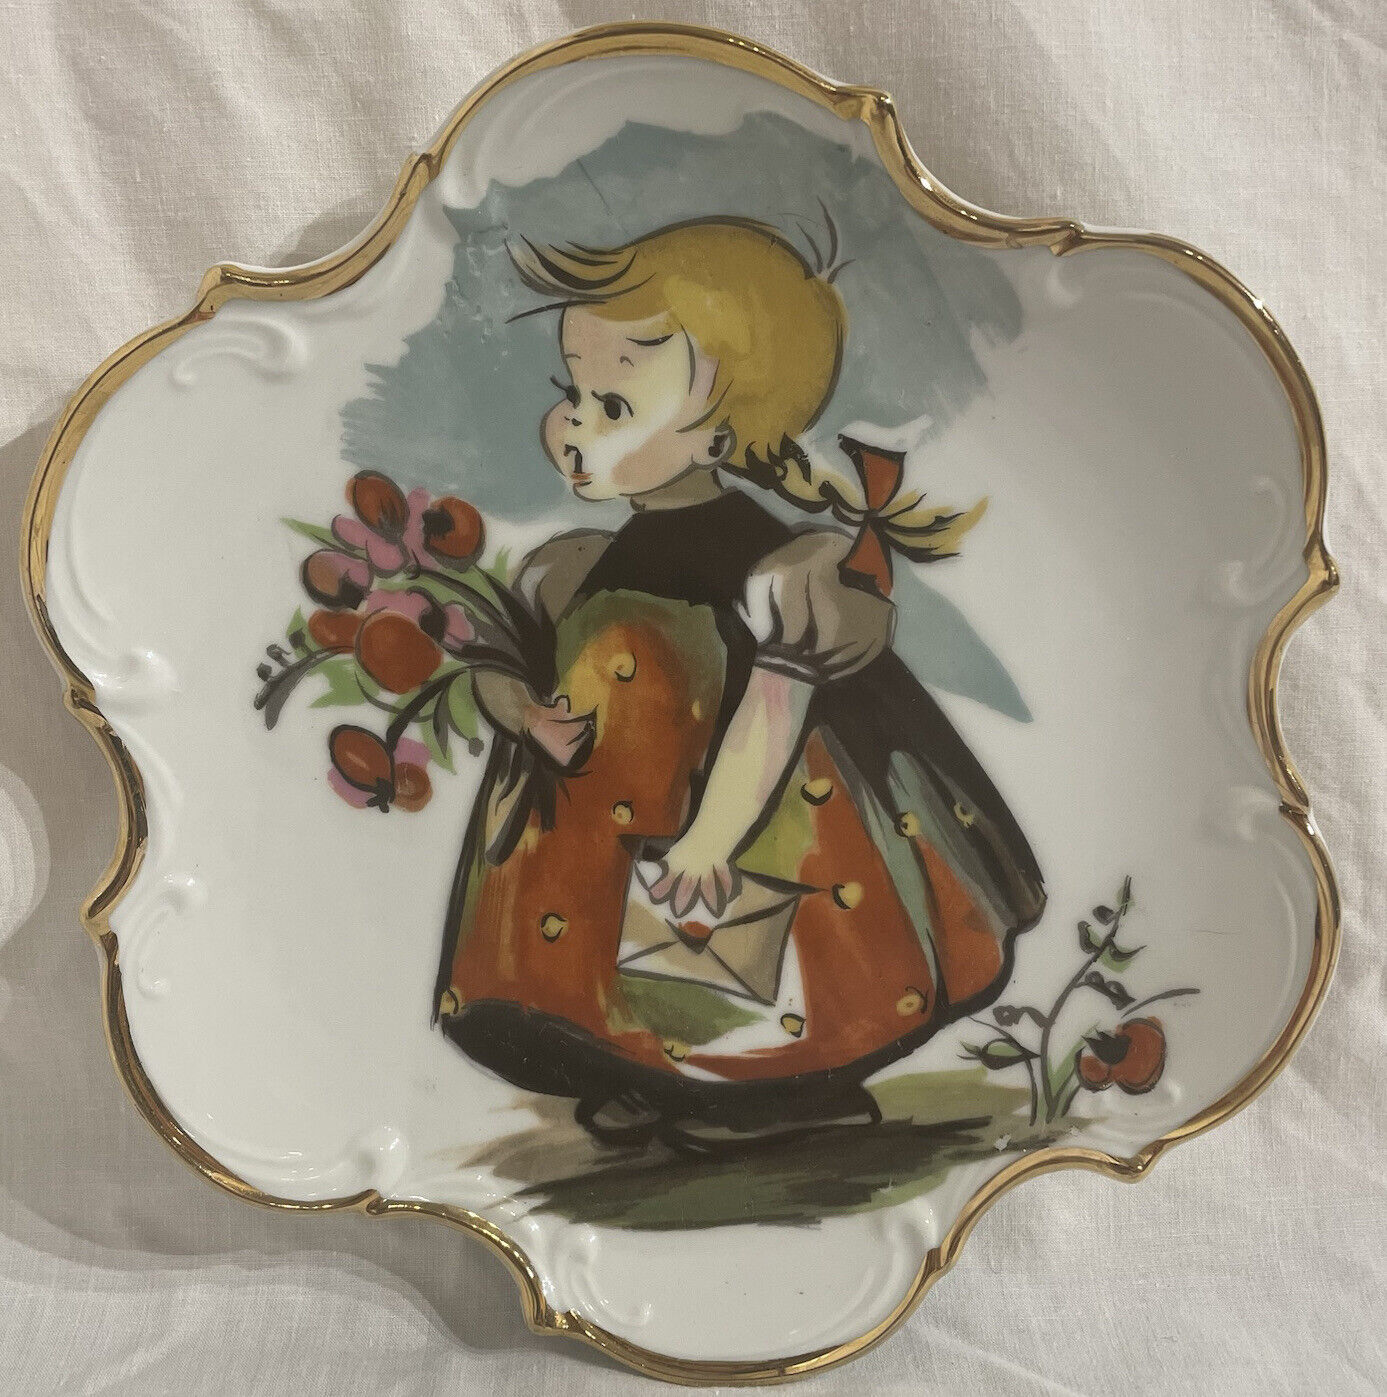 Porcelain Plate W/Gold Trim Girl W/Flowers, 7 1/2” Collectible Made In Japan